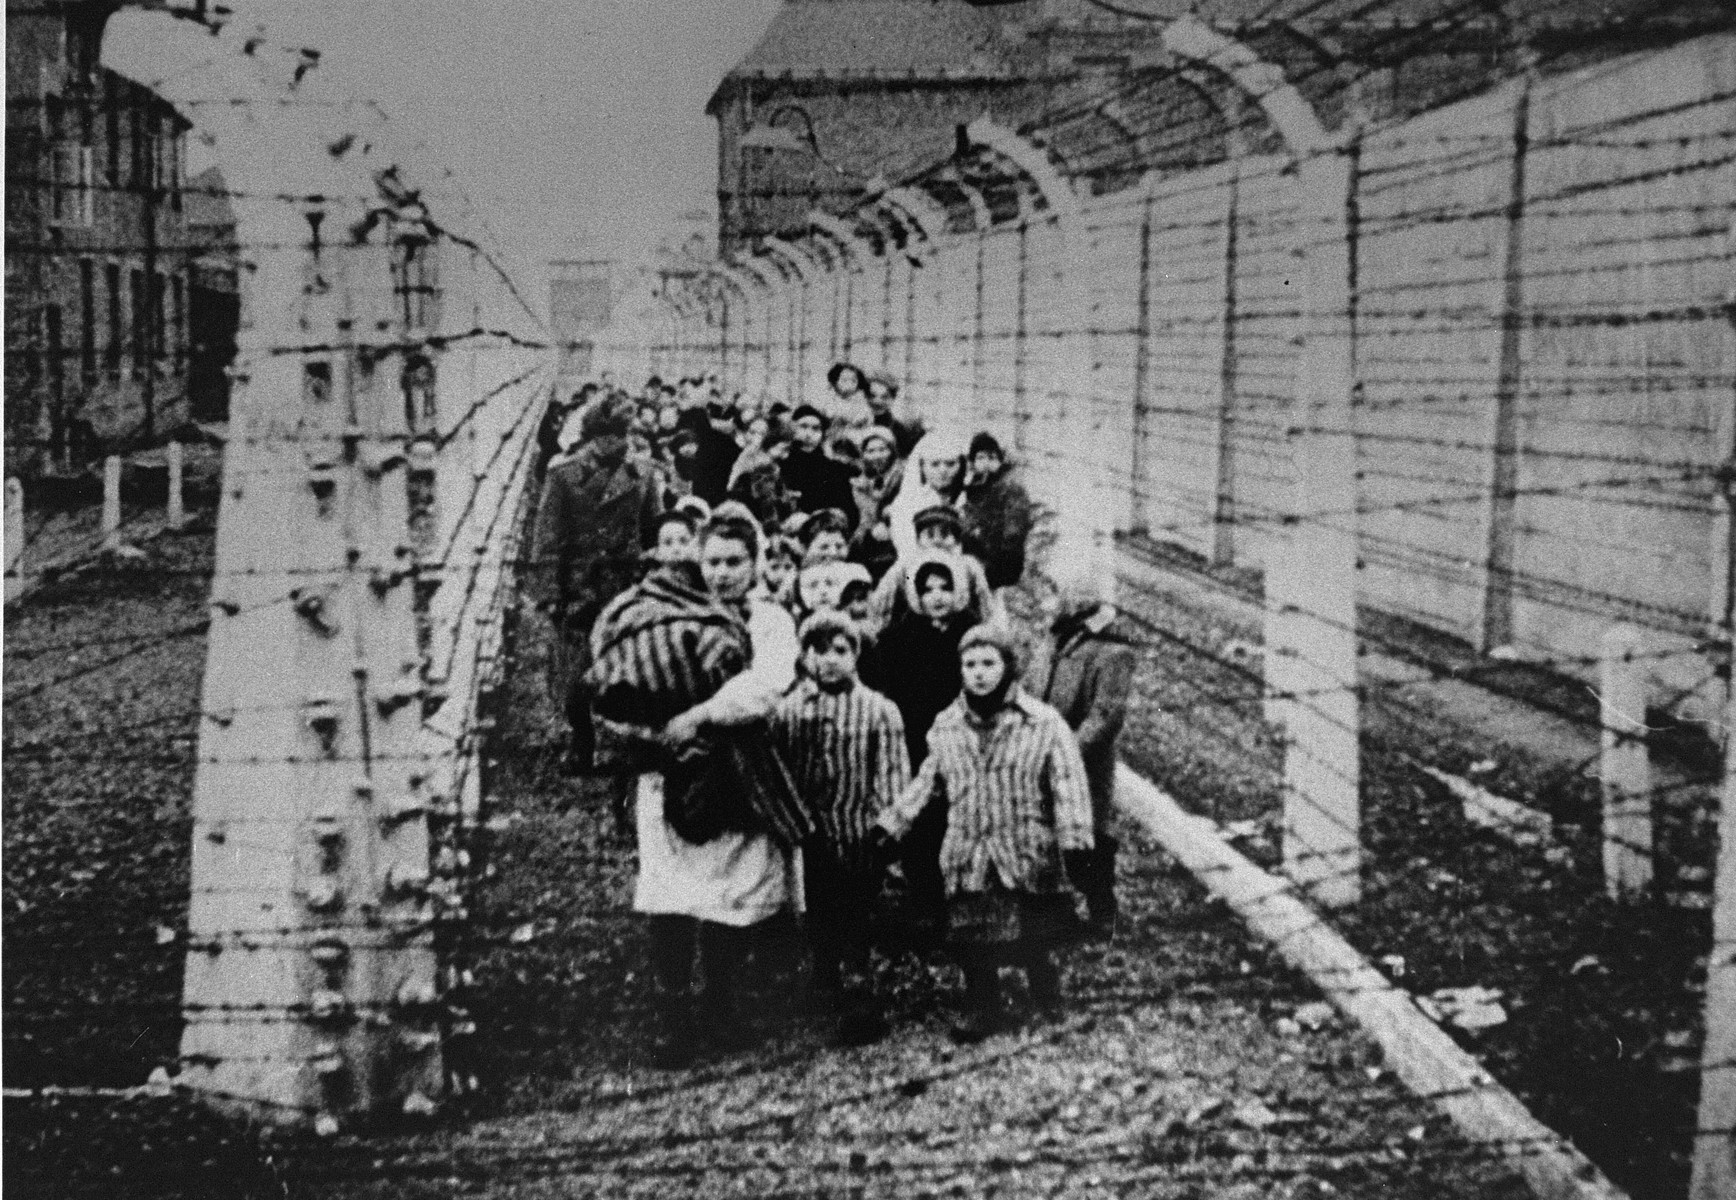 Wearing adult-size prisoner jackets, child survivors of Auschwitz are led by relief workers and Soviet soldiers through a narrow passage between two barbed-wire fences.

Eva Mozes is standing next to the nurse.  Holding her hand is her twin sister Miriam. Behind them in white pointed hats are Judy and Lea Csenghery,

STILL PHOTOGRAPH FROM THE SOVIET FILM of the liberation of Auschwitz, taken by the film unit of the First Ukrainian Front.